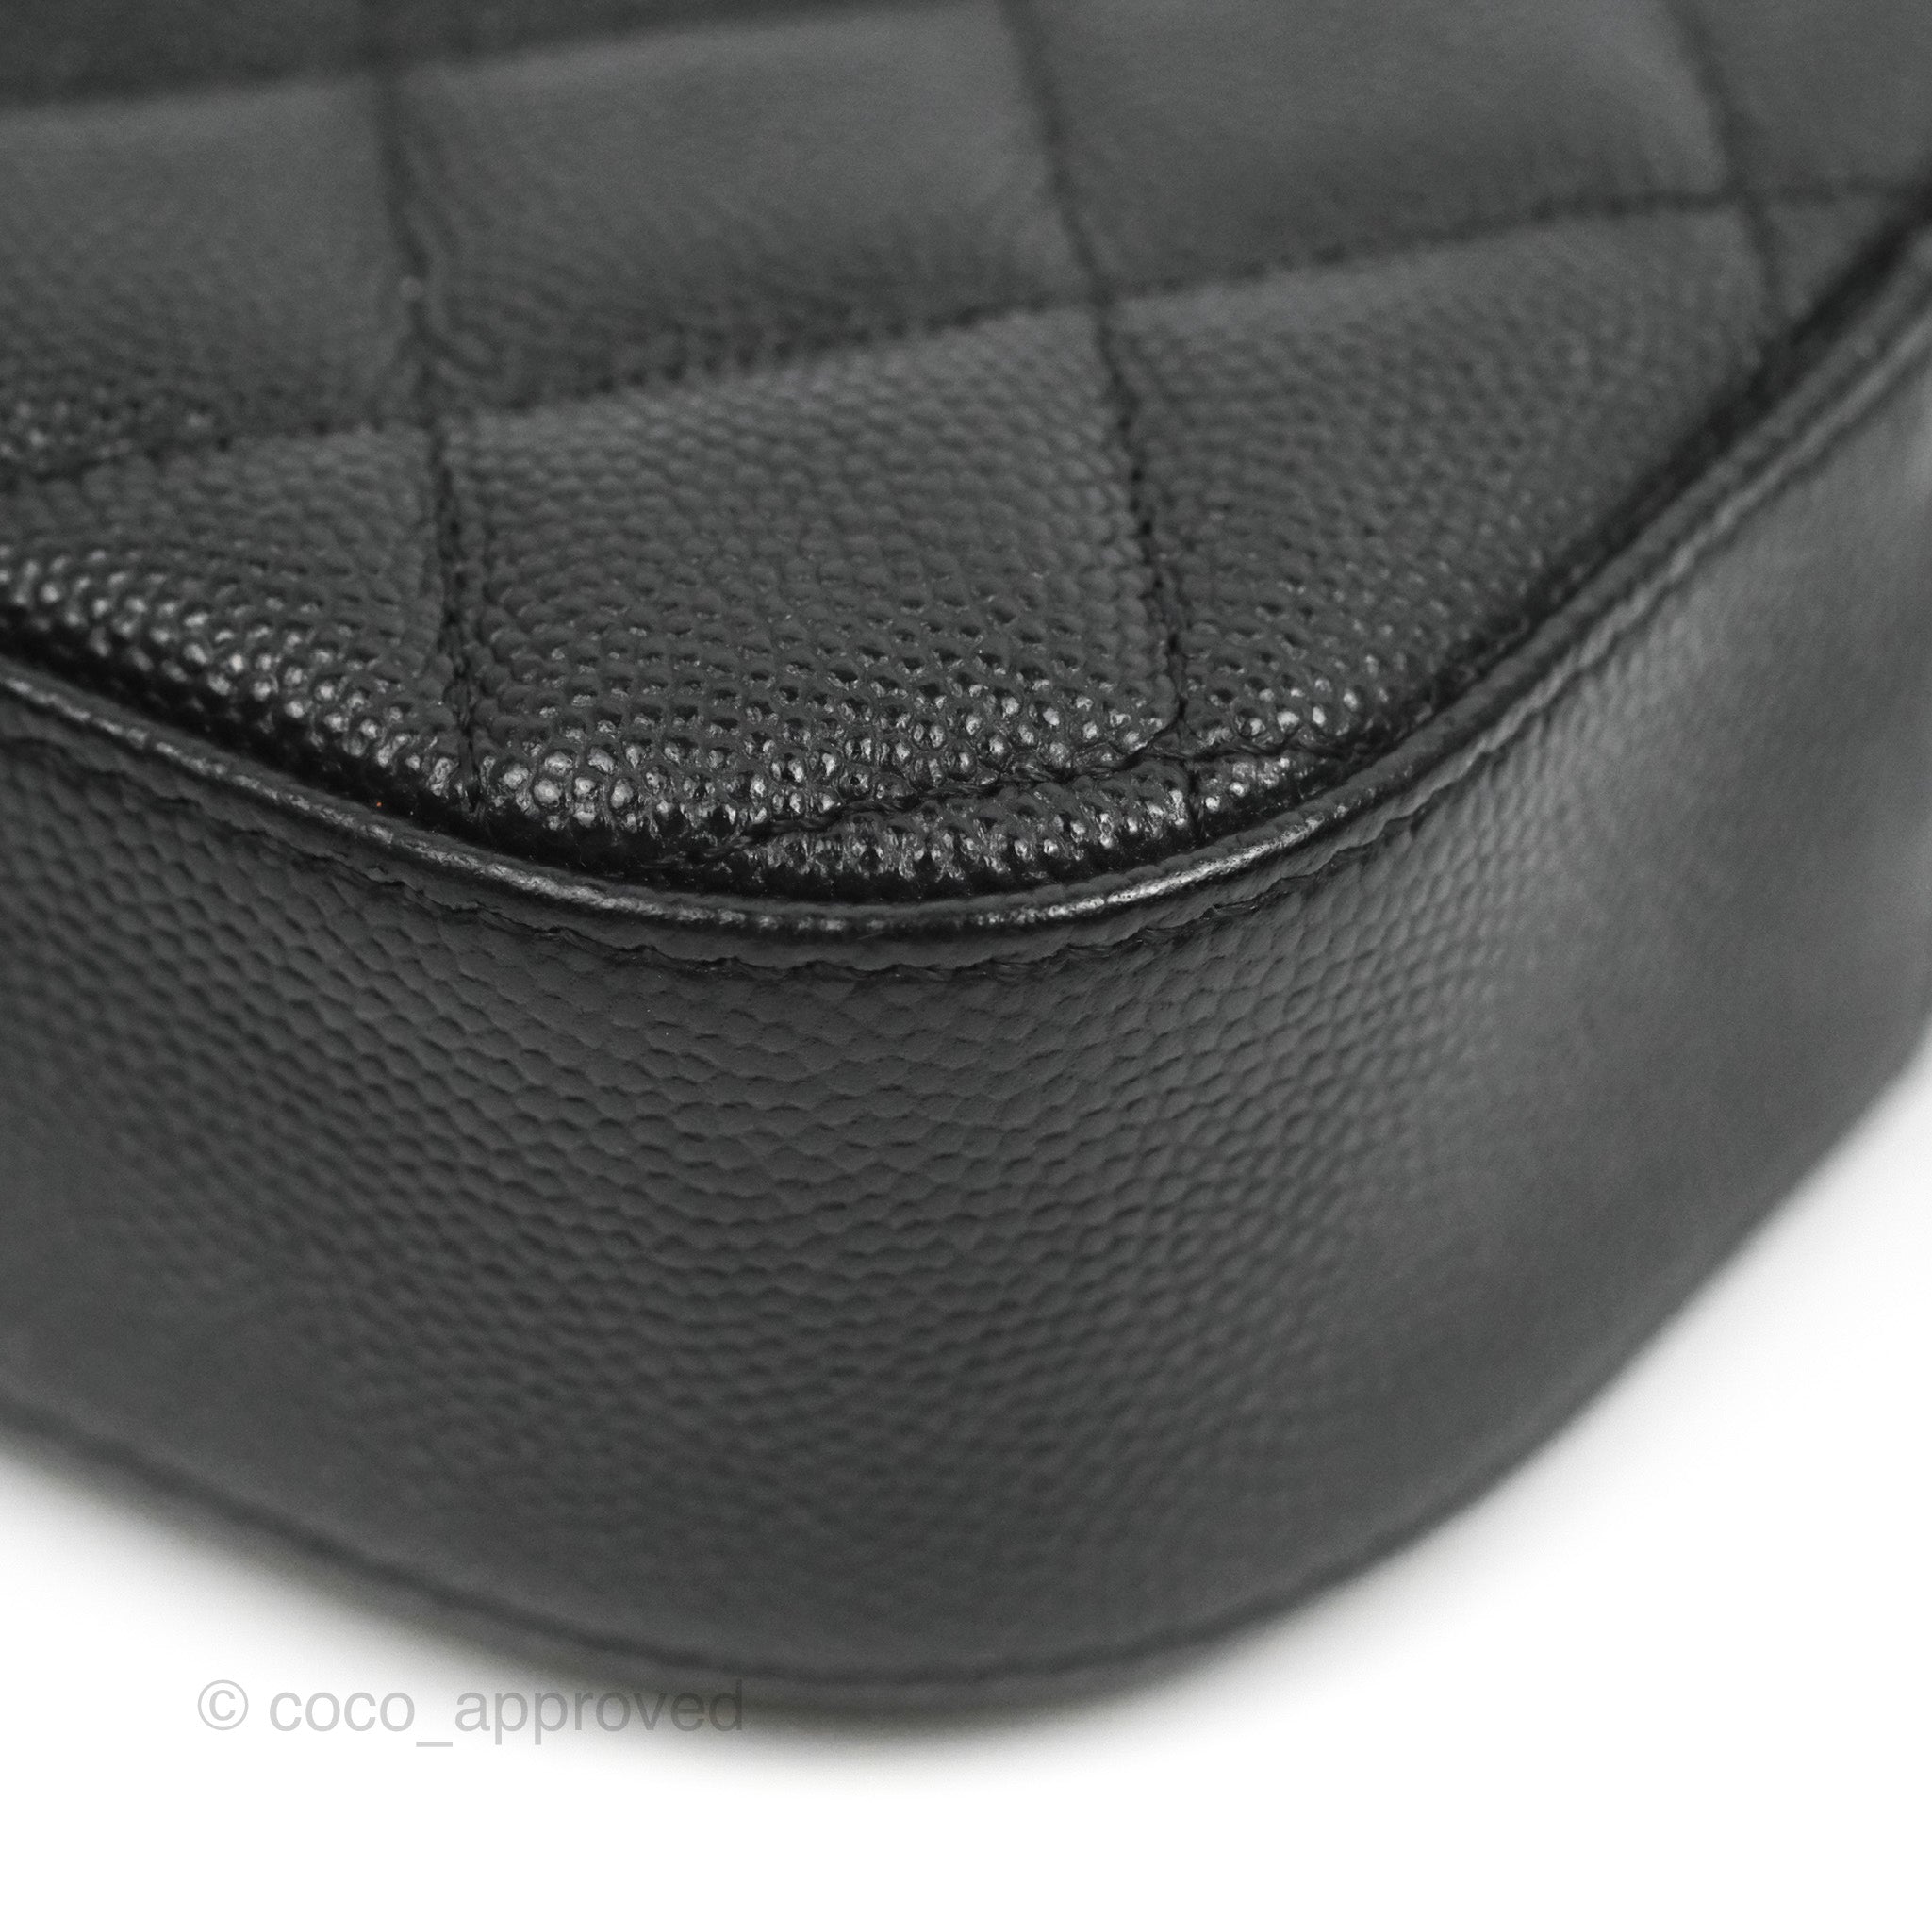 CHANEL Caviar Quilted Camera Bag Black | FASHIONPHILE